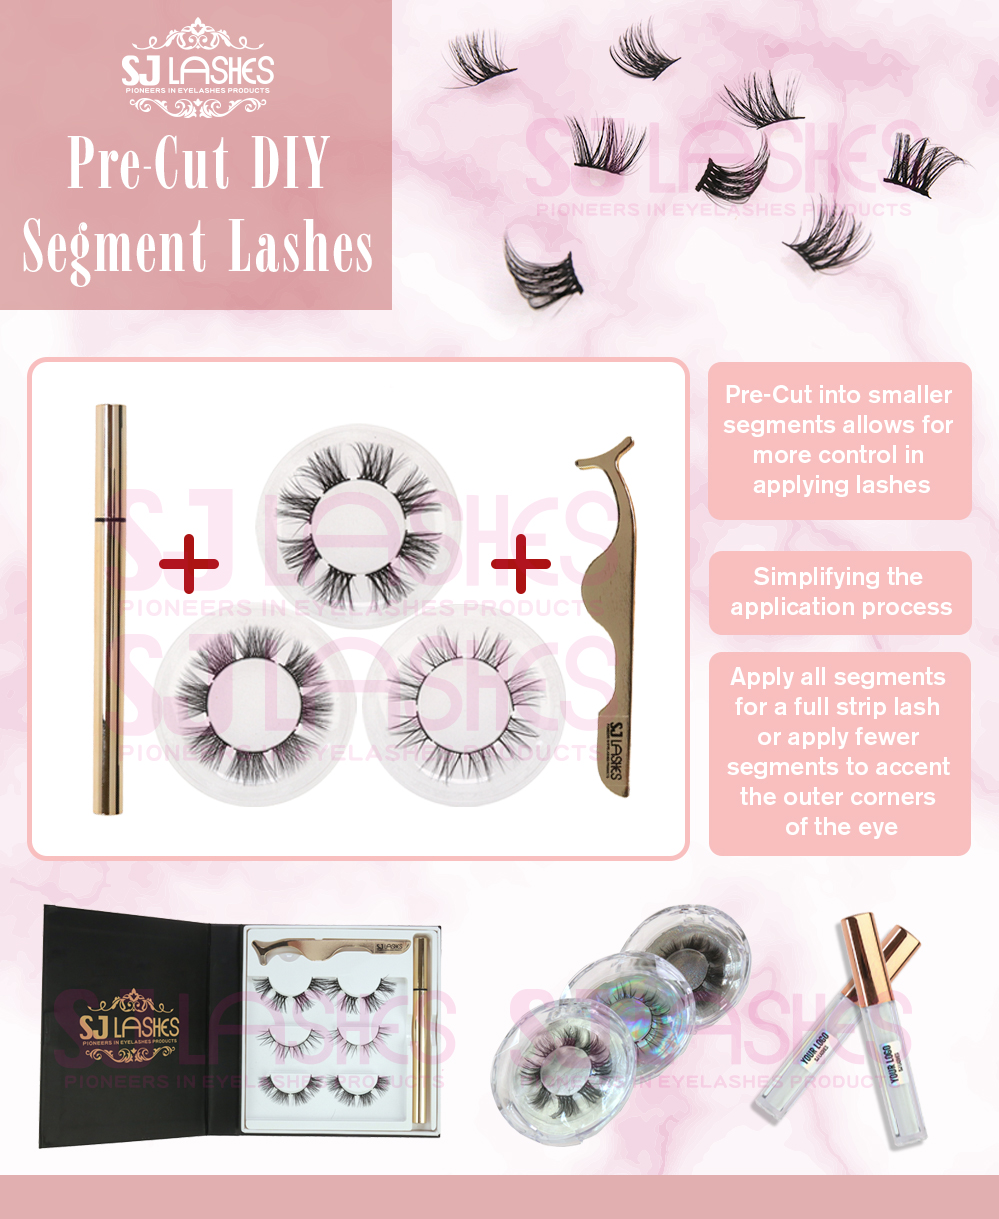 Different Packaging Options for DIY Segment Lashes